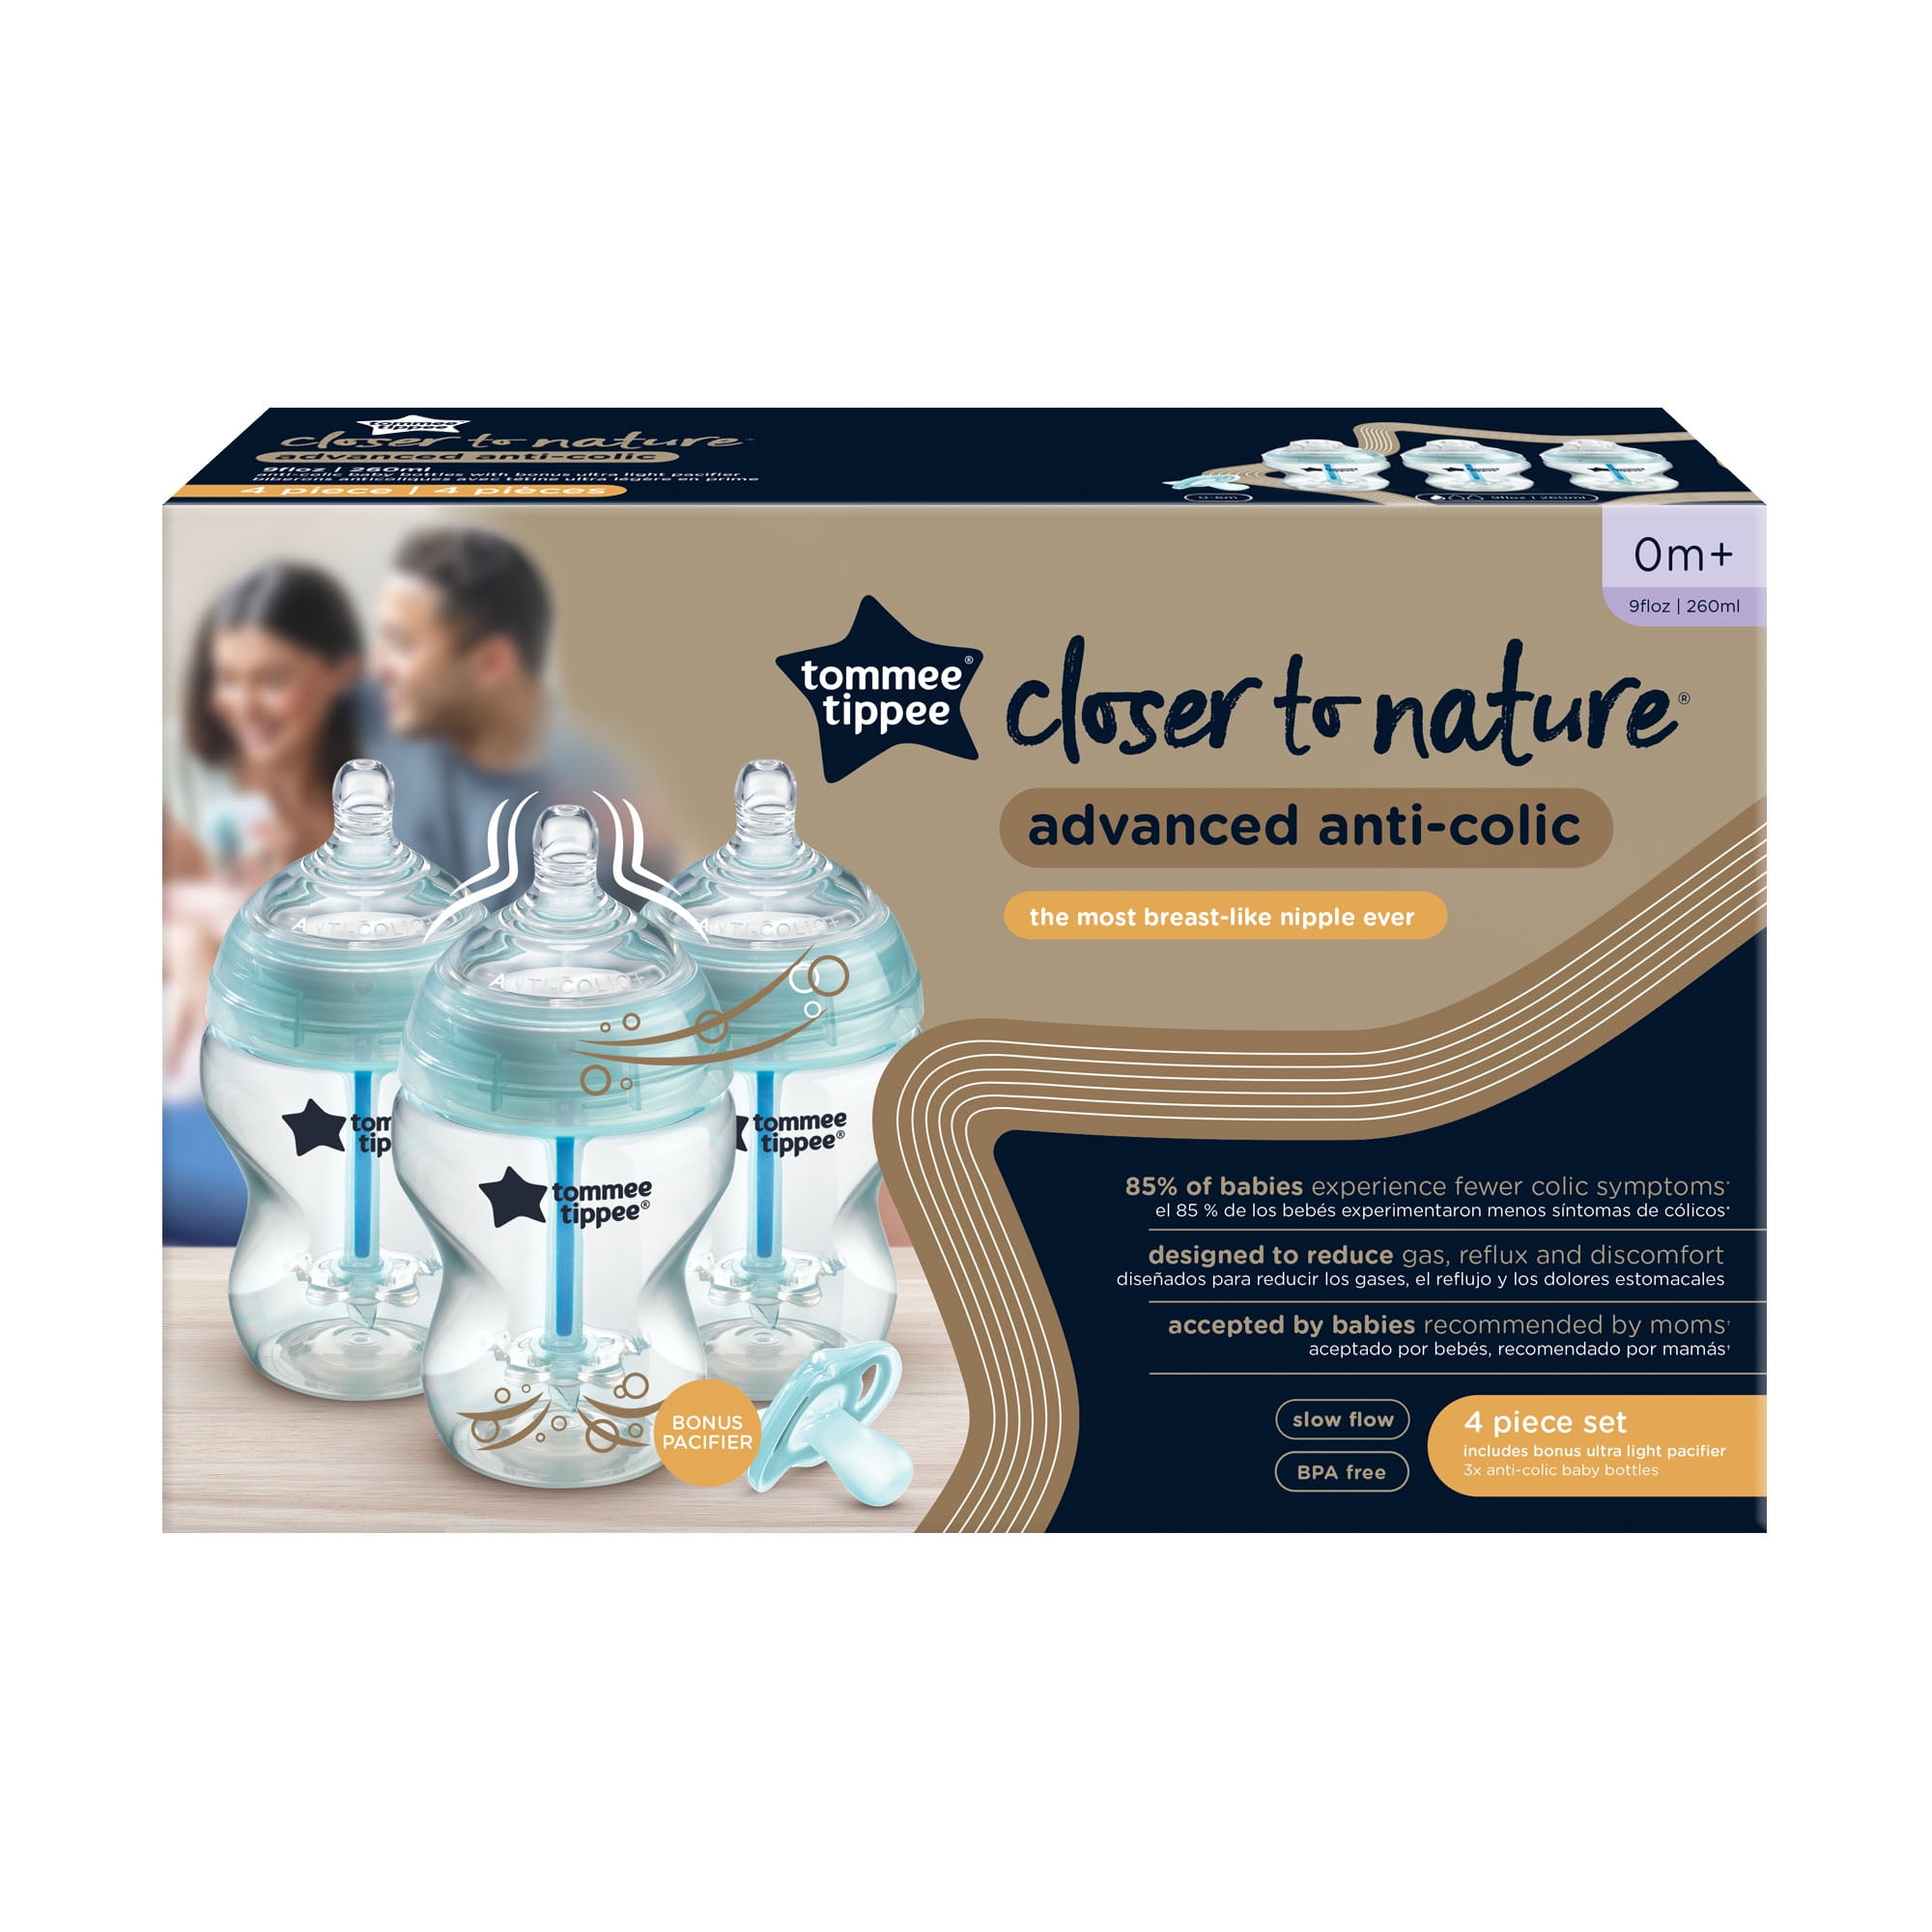 TOMMEE TIPPEE Advanced Anti-Colic Baby Bottle - 2 pack - CITYPARA